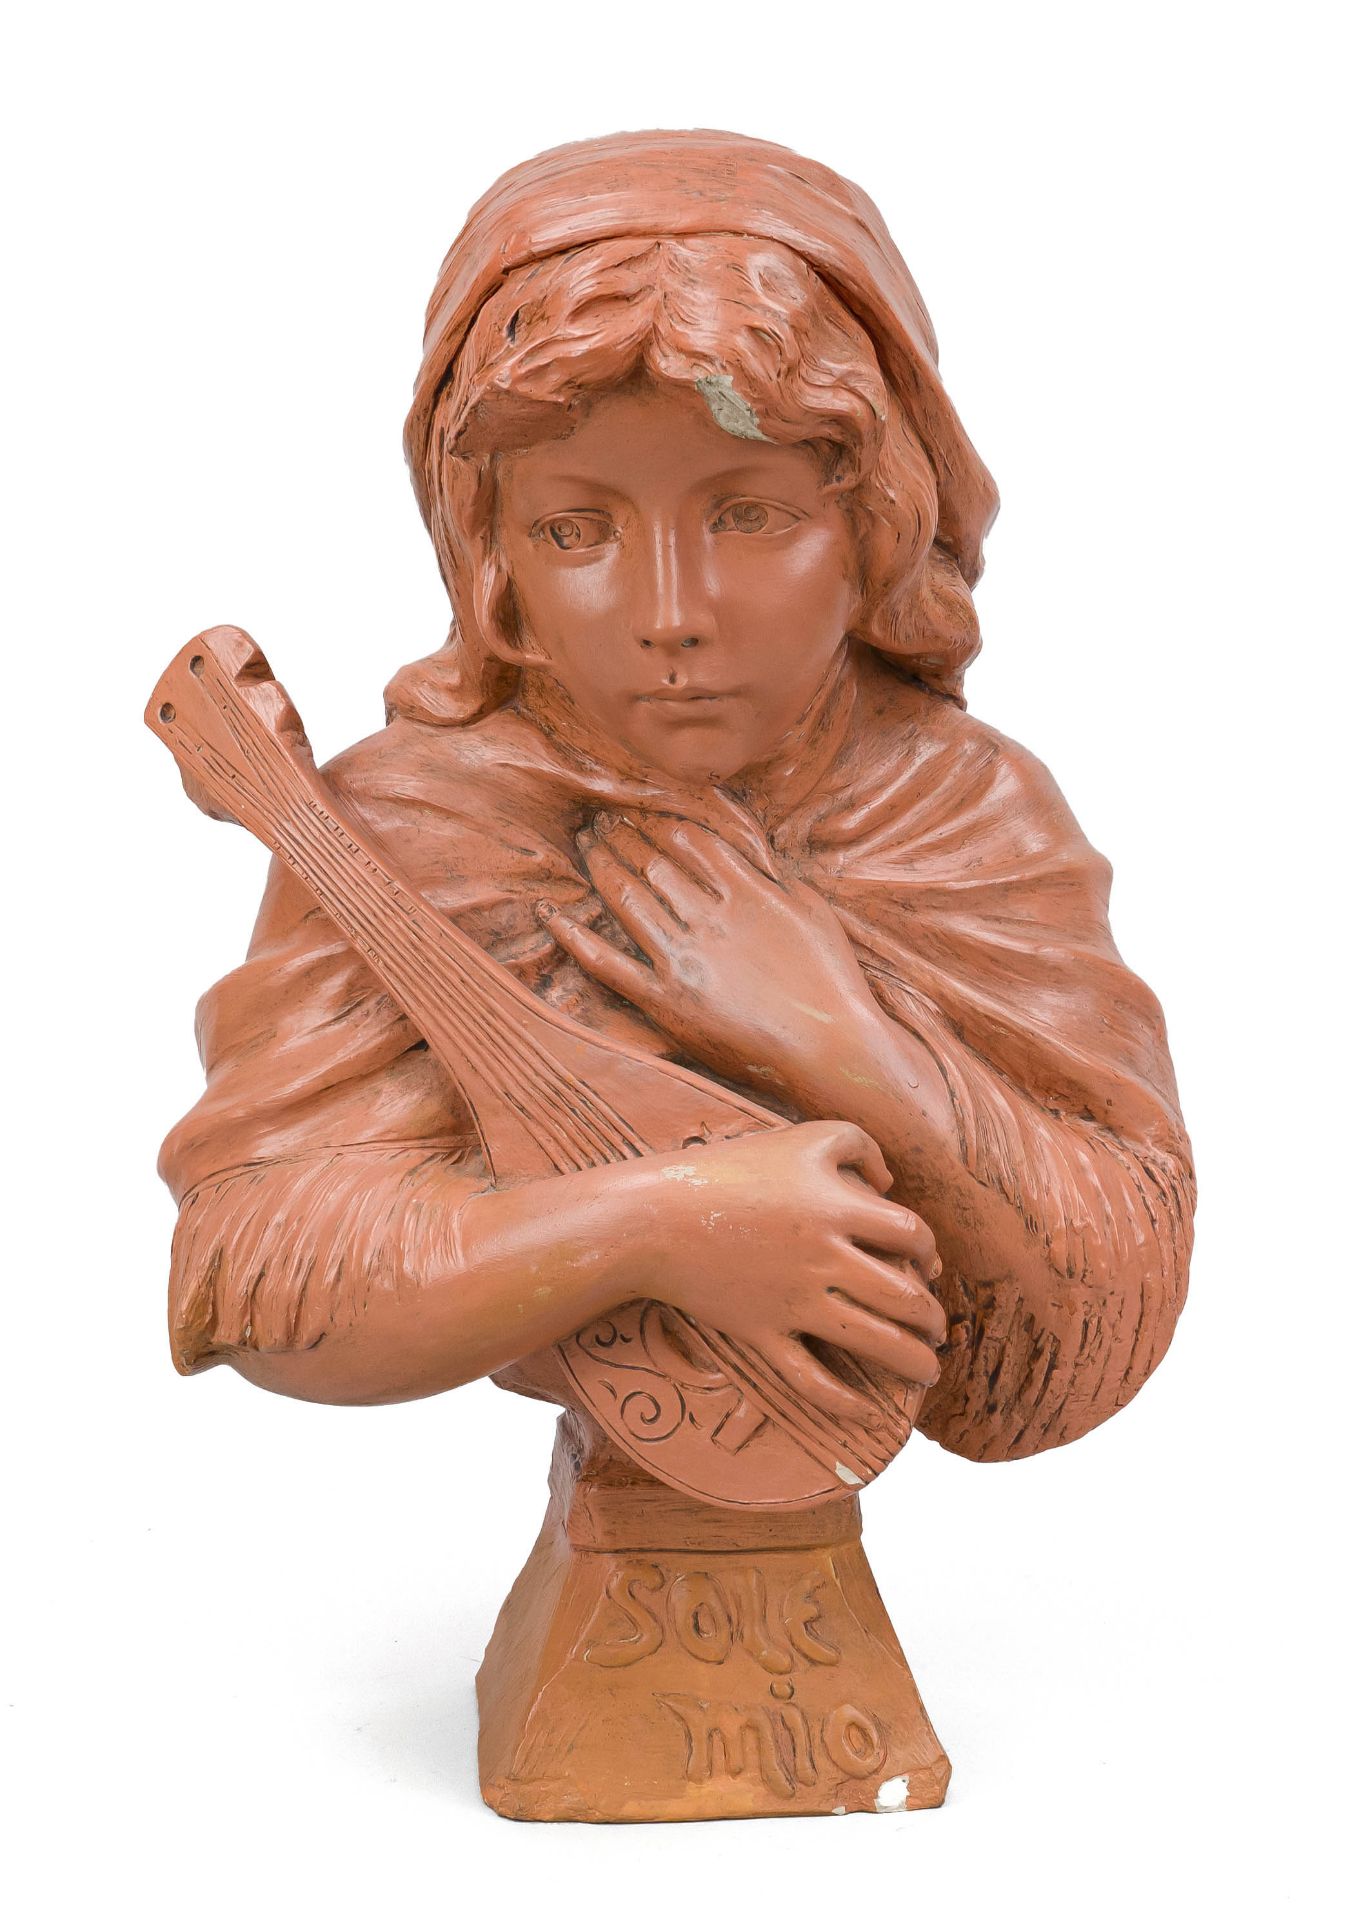 signed G. Van Vaerenbergh, Dutch sculptor c. 19th century, bust of a girl with lute, inscribed